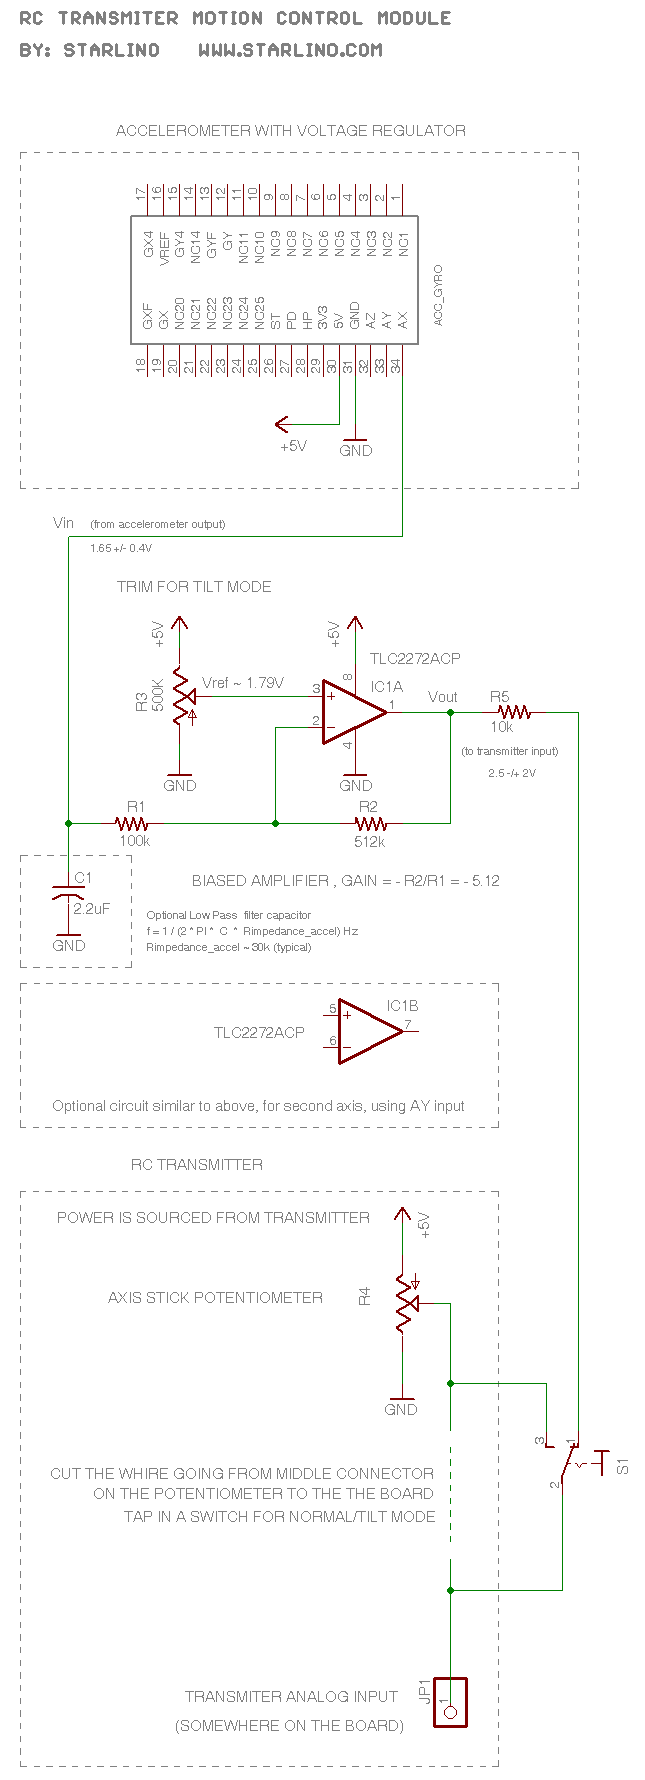 rc_transmitter_motion_control_schematic_full.png